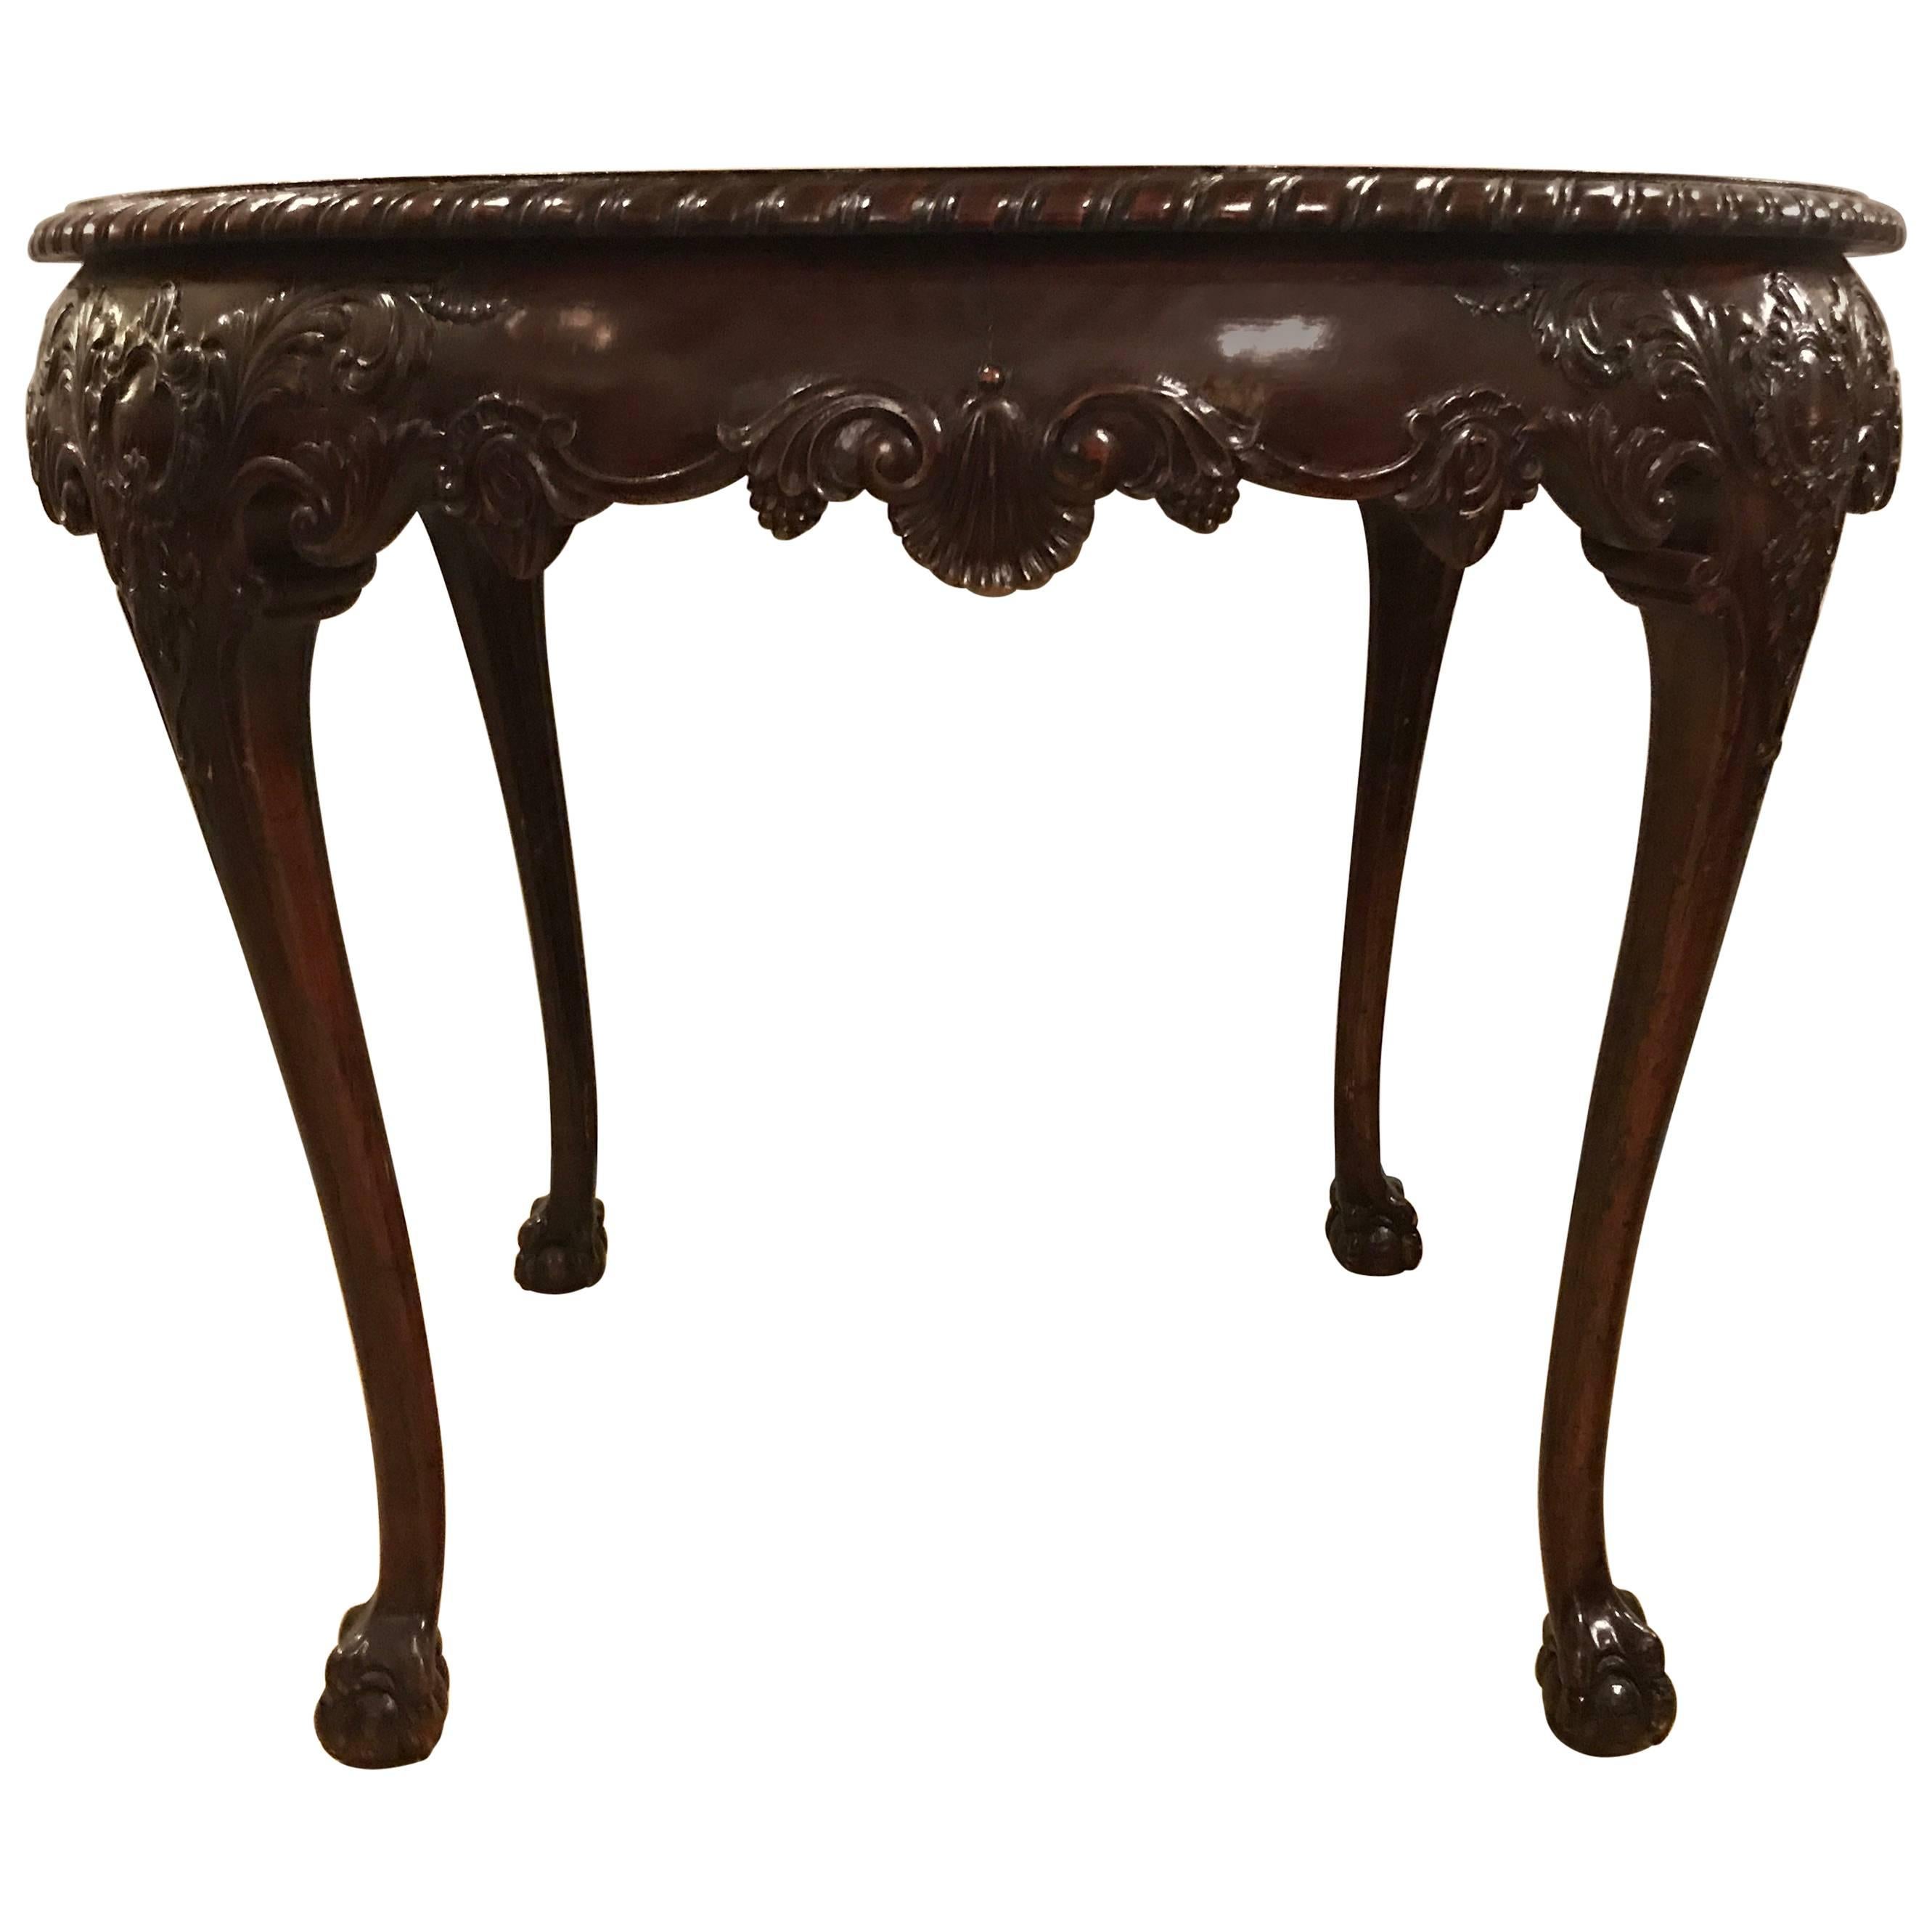 Georgian Centre Table, Circular on Ball and Claw Feet with Cabriole Legs